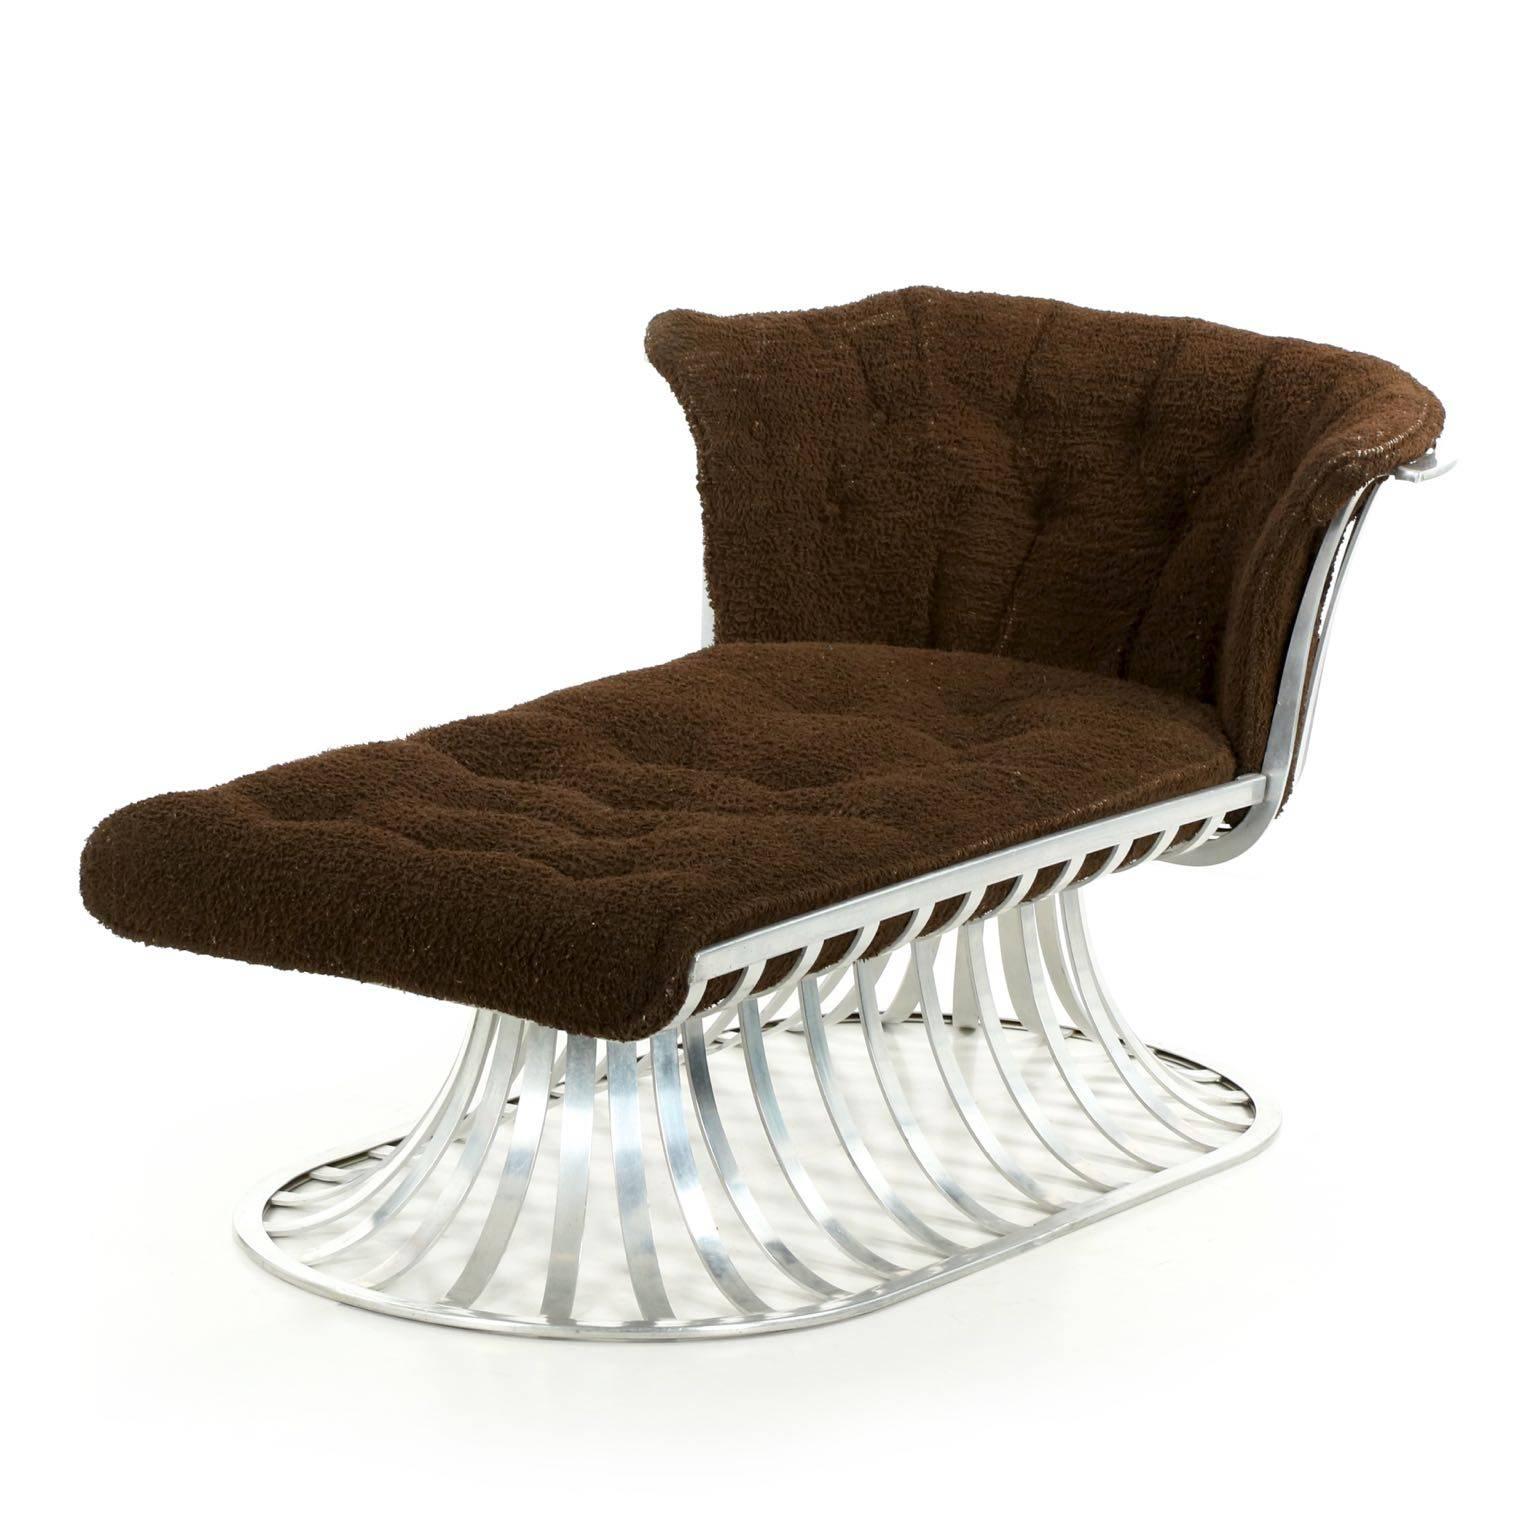 Part of a most interesting series by Russell Woodard, circa 1960 employing curved aluminum spokes into tables, sofas, chairs, dining tables and this particularly striking chaise longue. There is something innately comfortable about the piece,